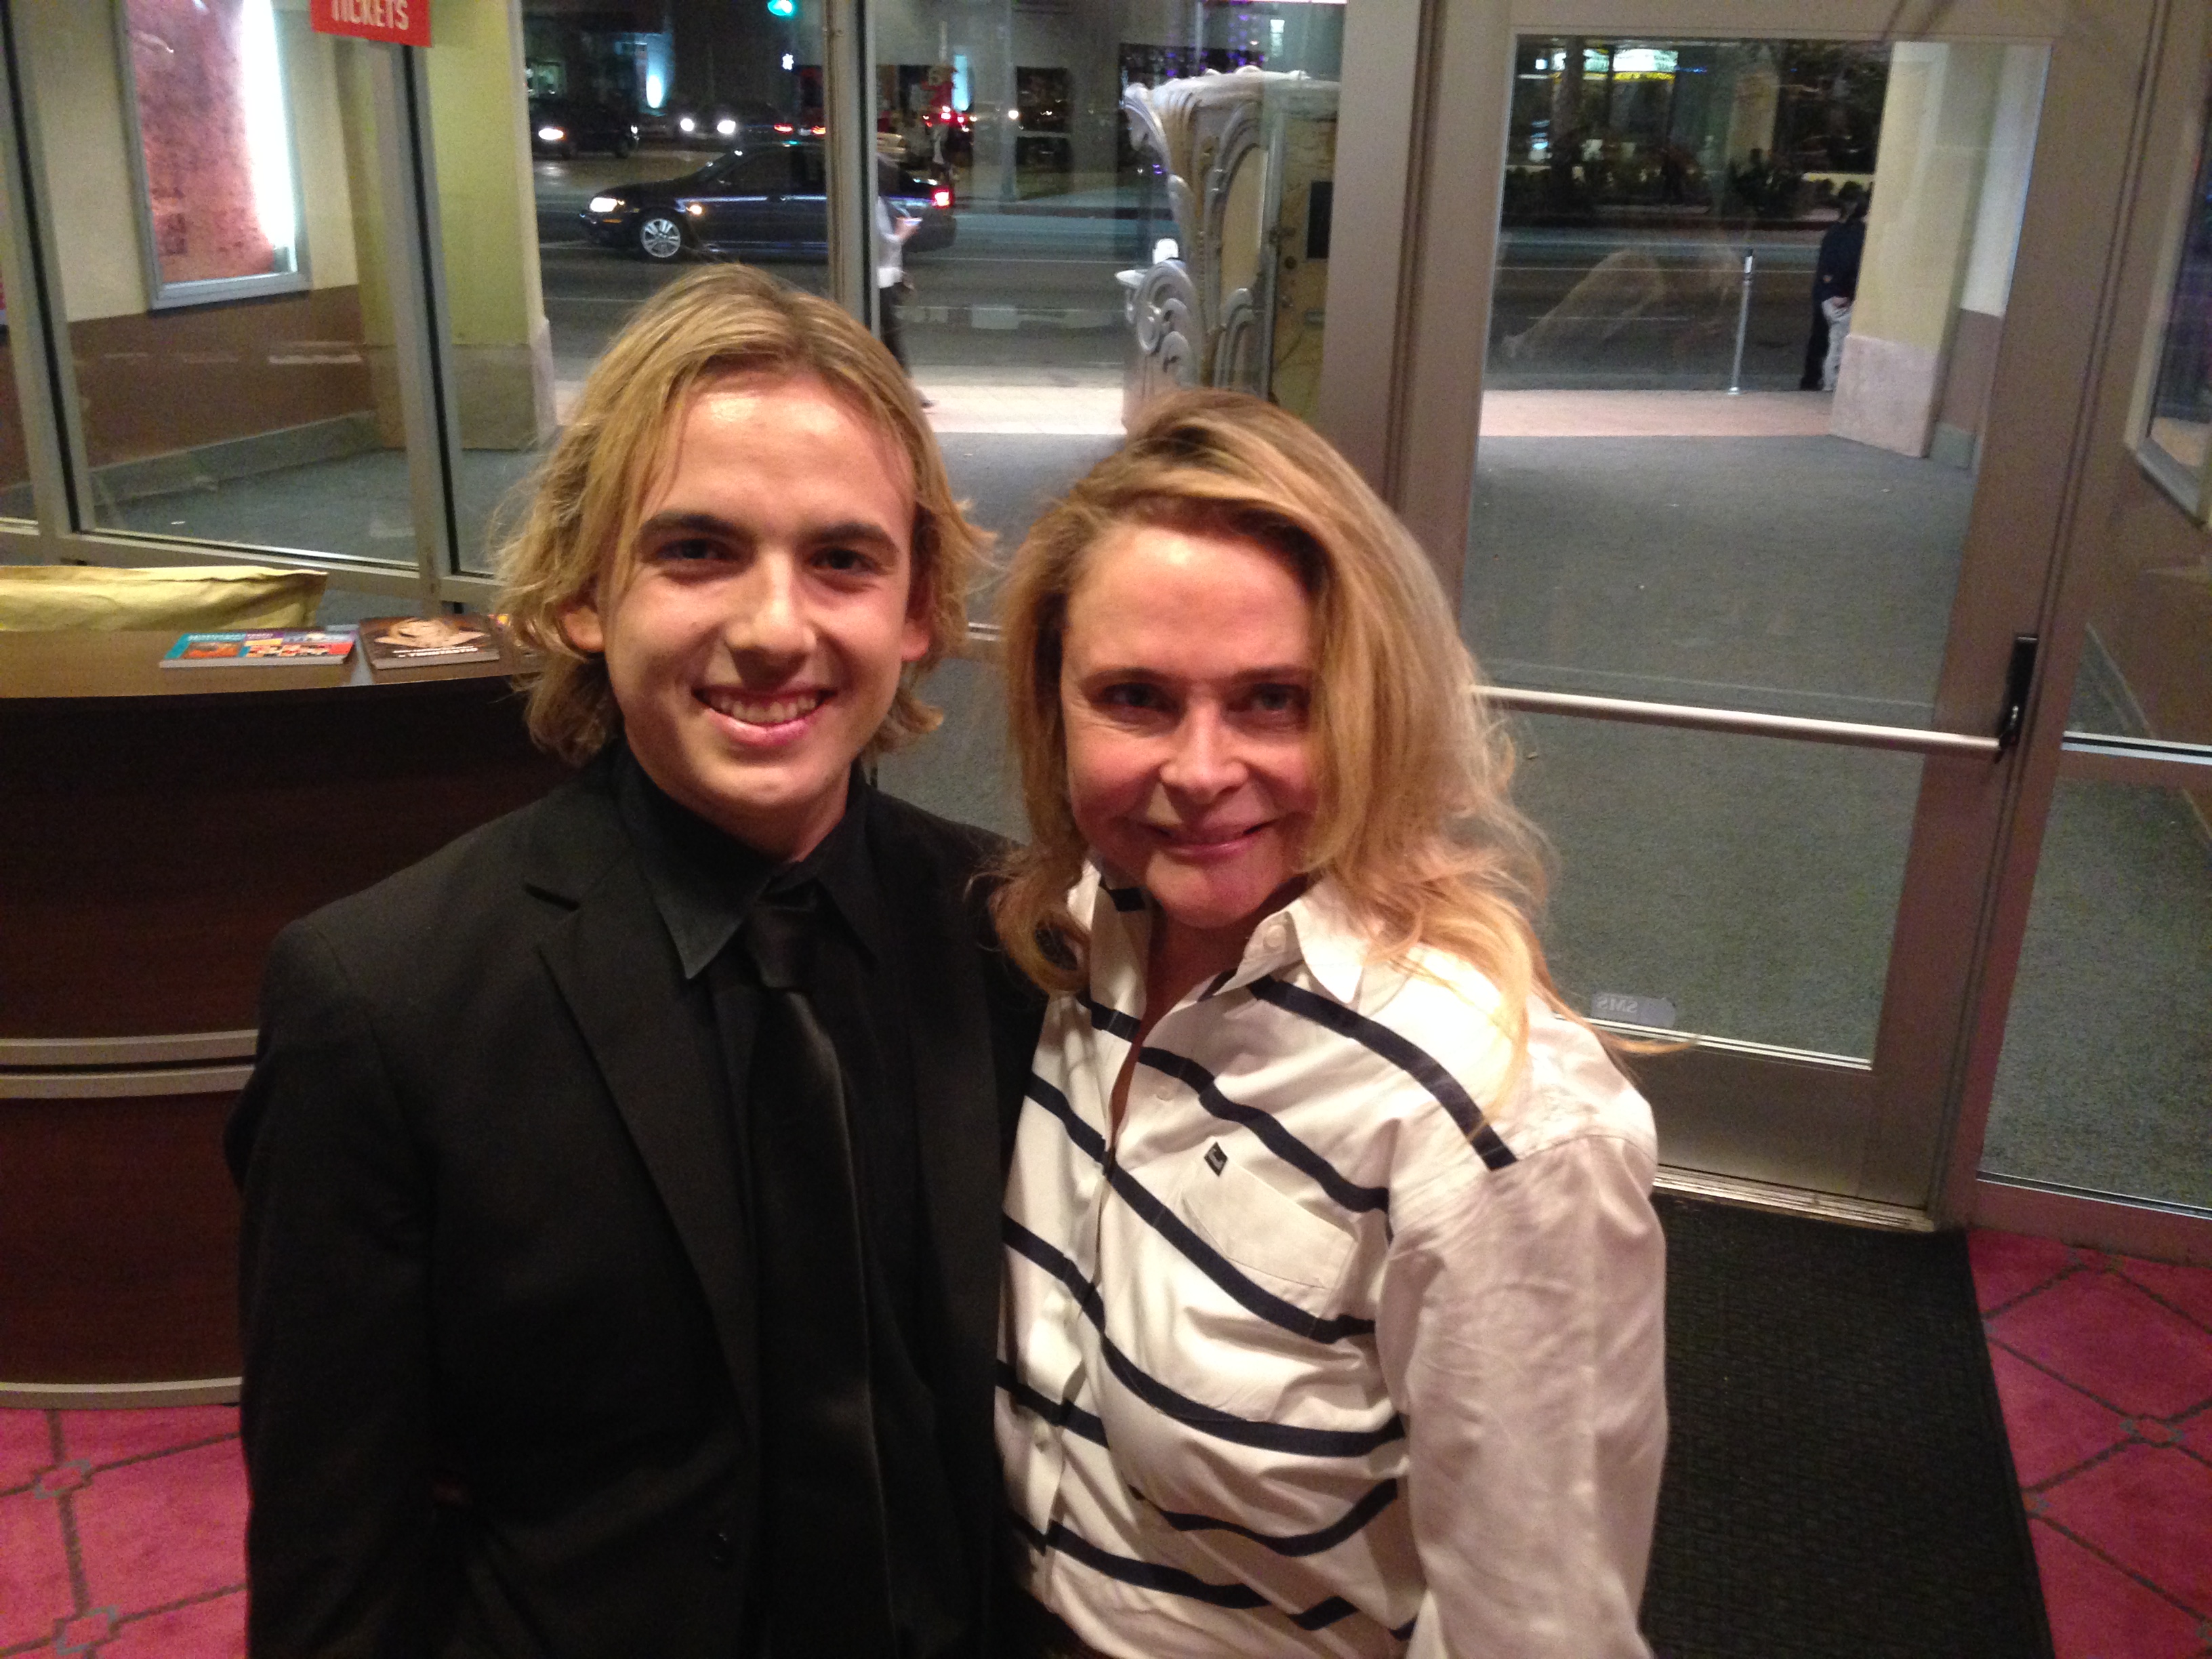 Adam with Priscilla Barnes, gypsy mom on the current show, Jane the Virgin. They share a person in common, Debra Manners.